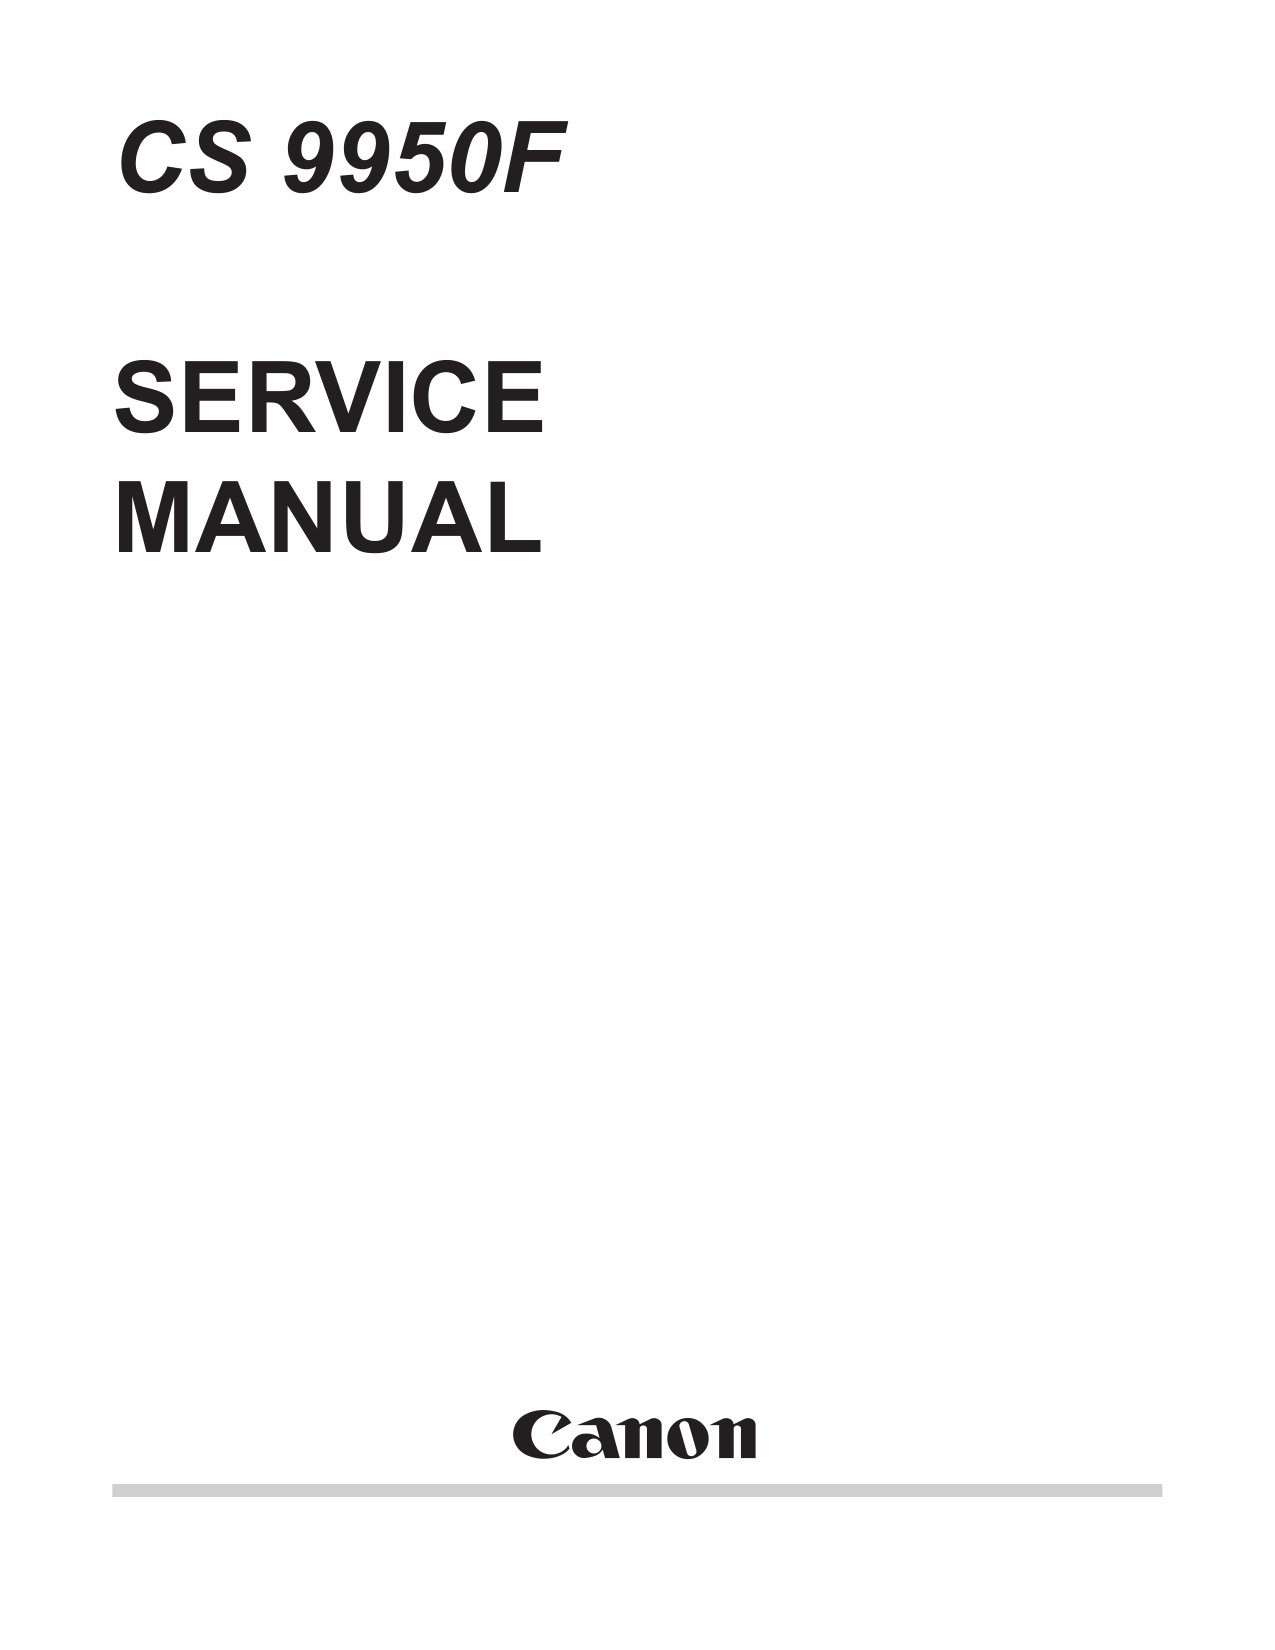 Canon Options CS-9950F Document-Scanner Parts and Service Manual-1